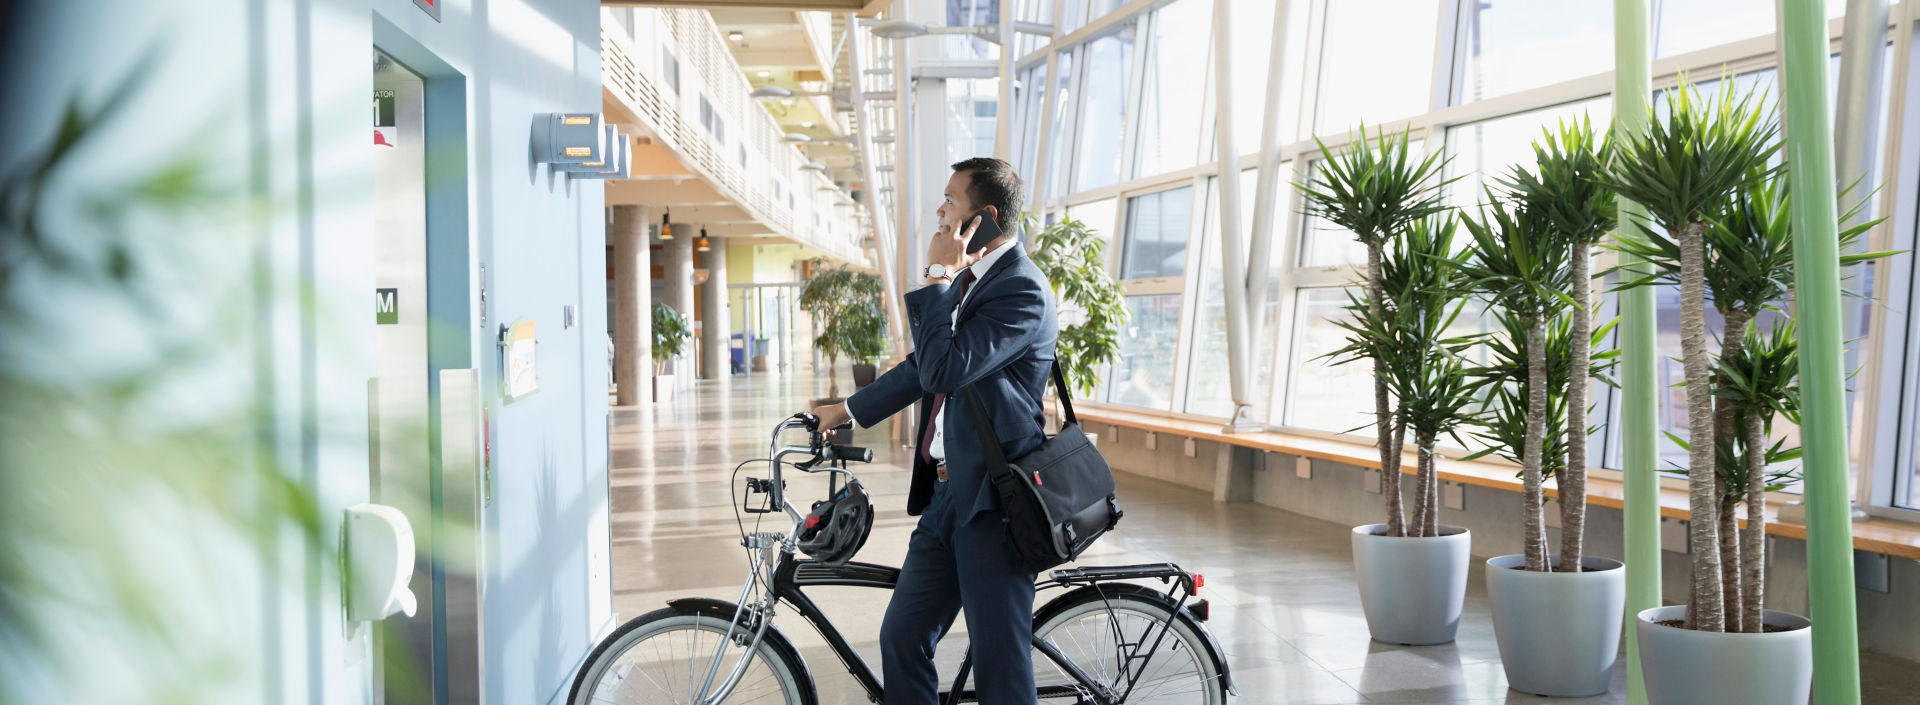 Businessman commuter with bicycle talking on smart phone, waiting at elevator in office lobby.